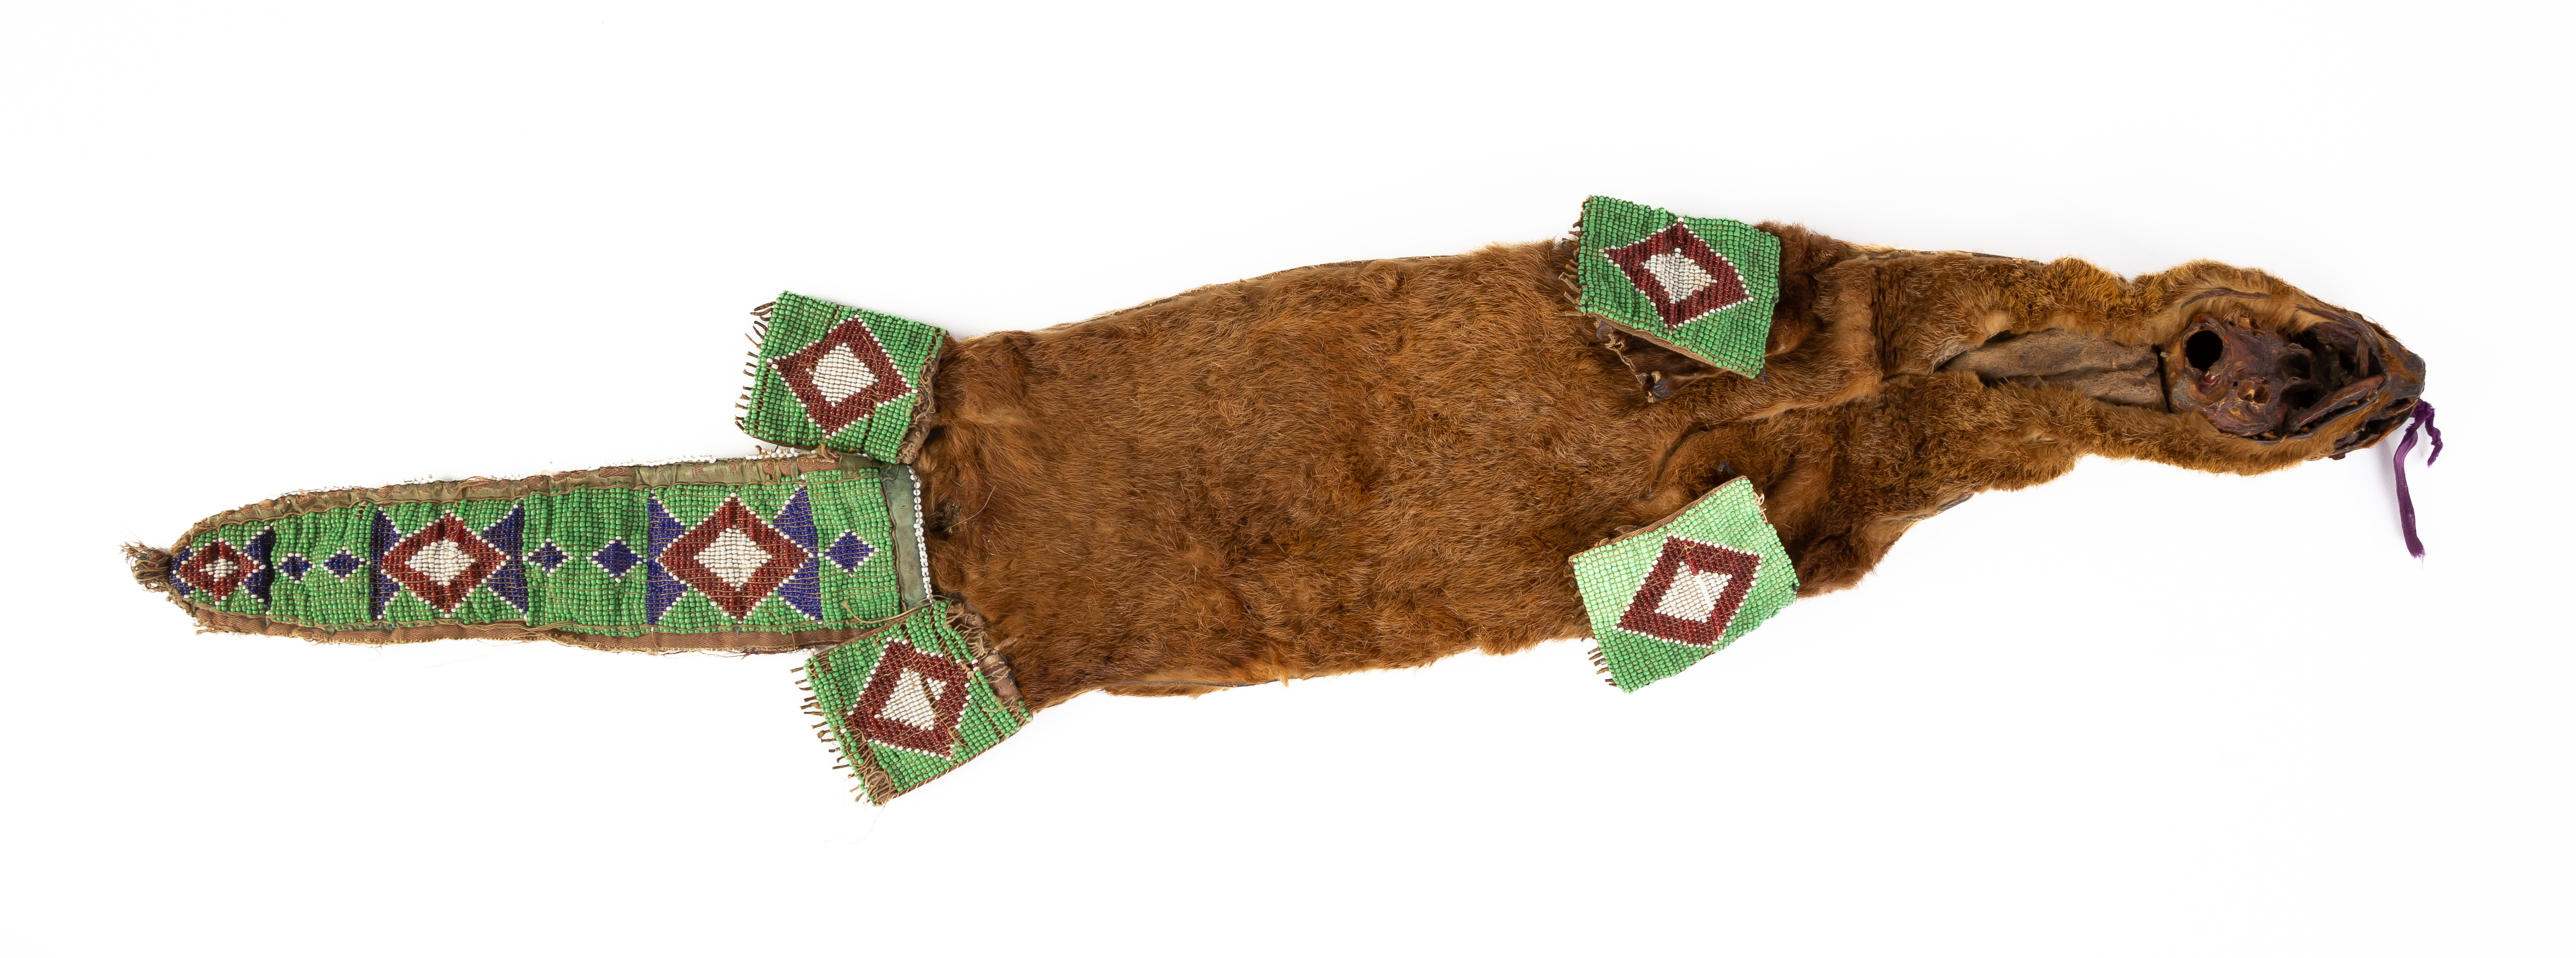 GREAT LAKES OTTER SKIN POUCH Circa